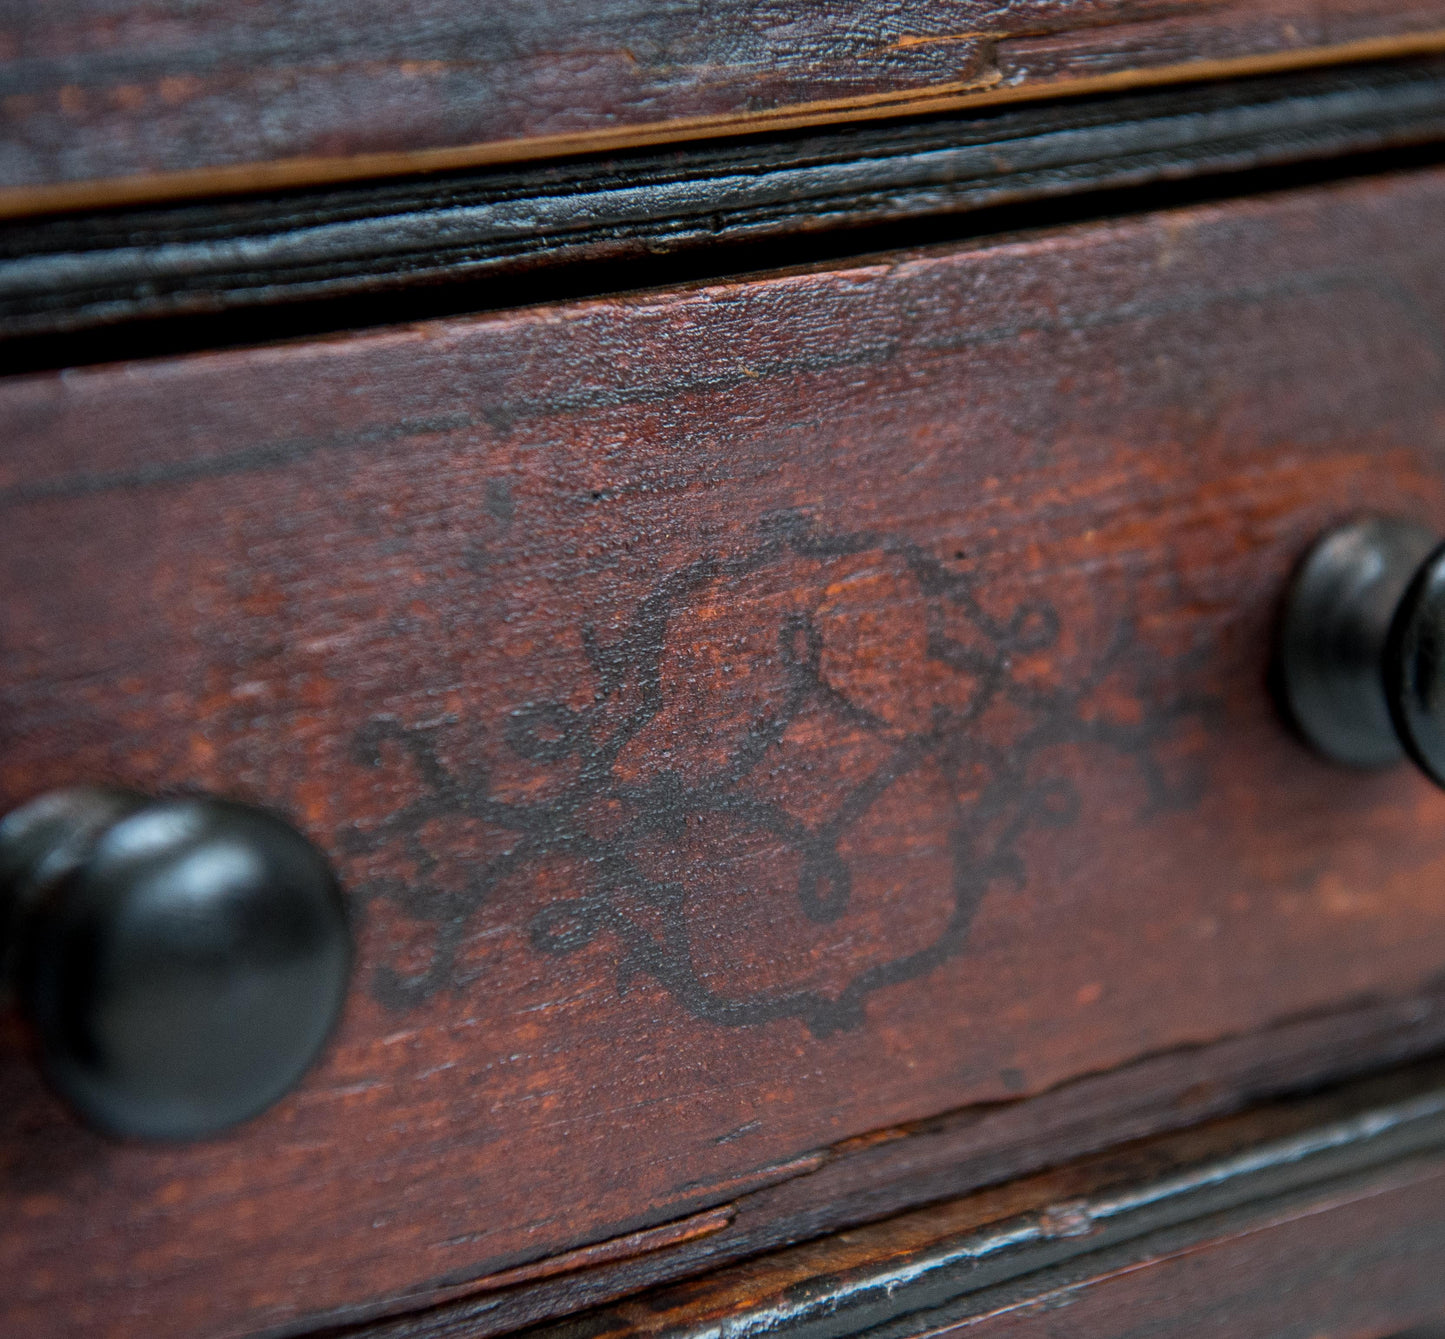 Miniature or apprentice pine chest of drawers, dating from the late 19th Century